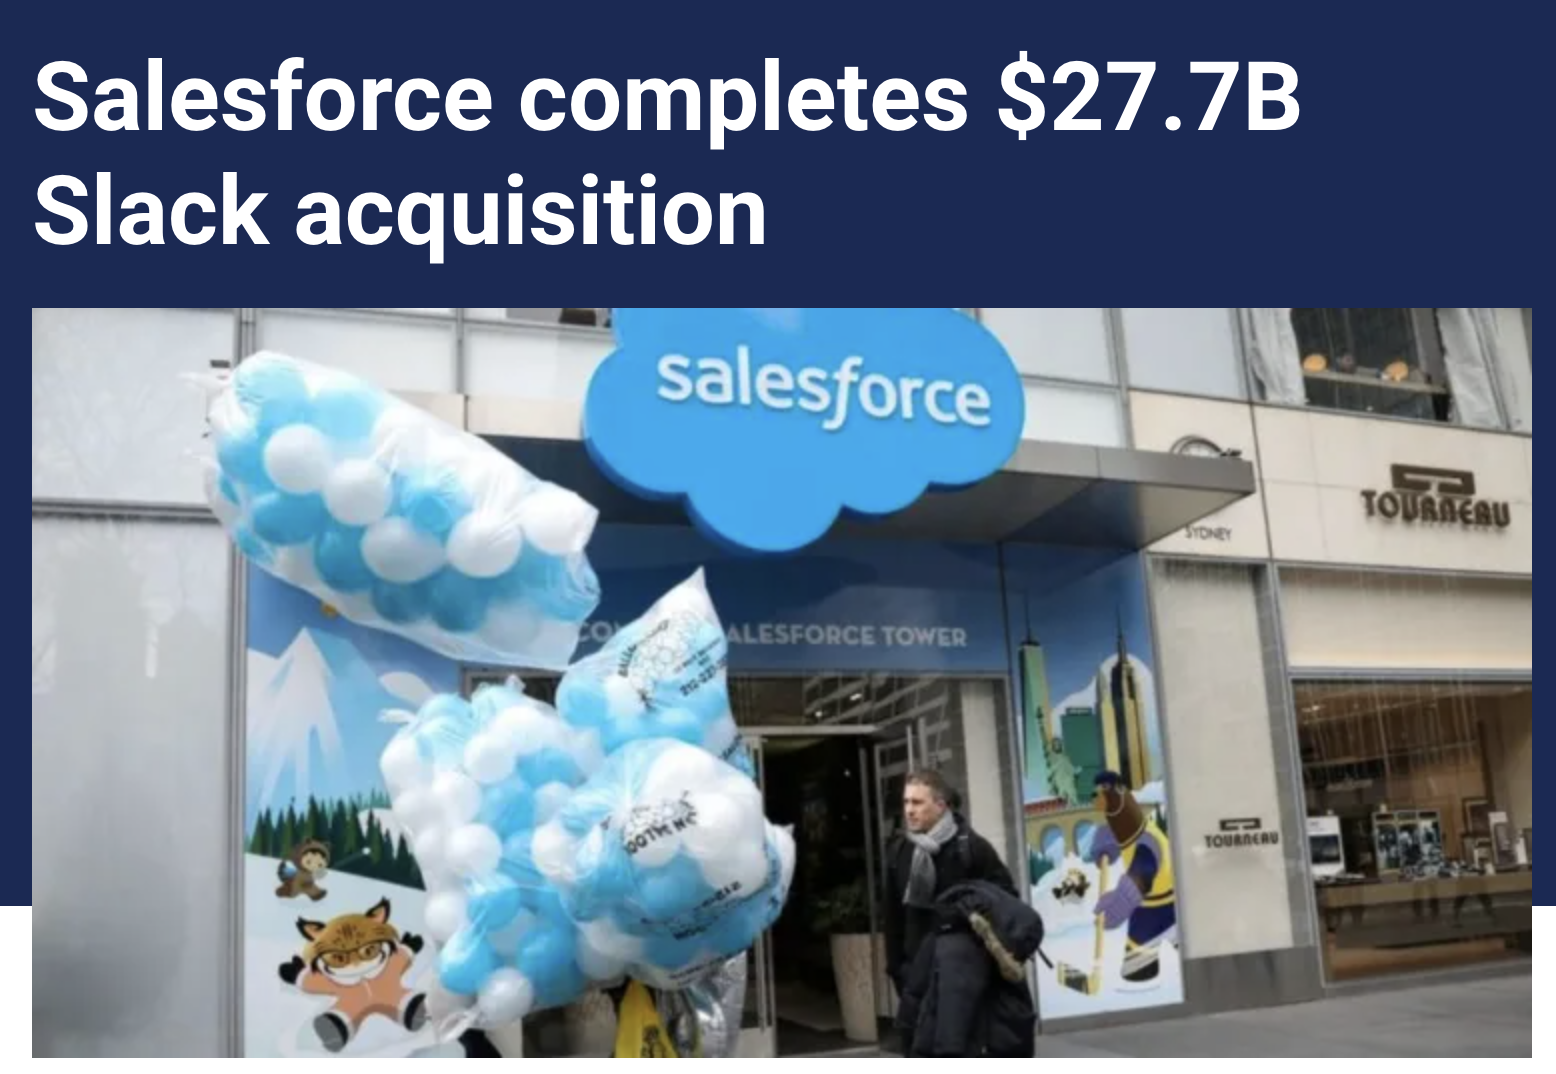 Salesforce Acquired Slack For $27.7B